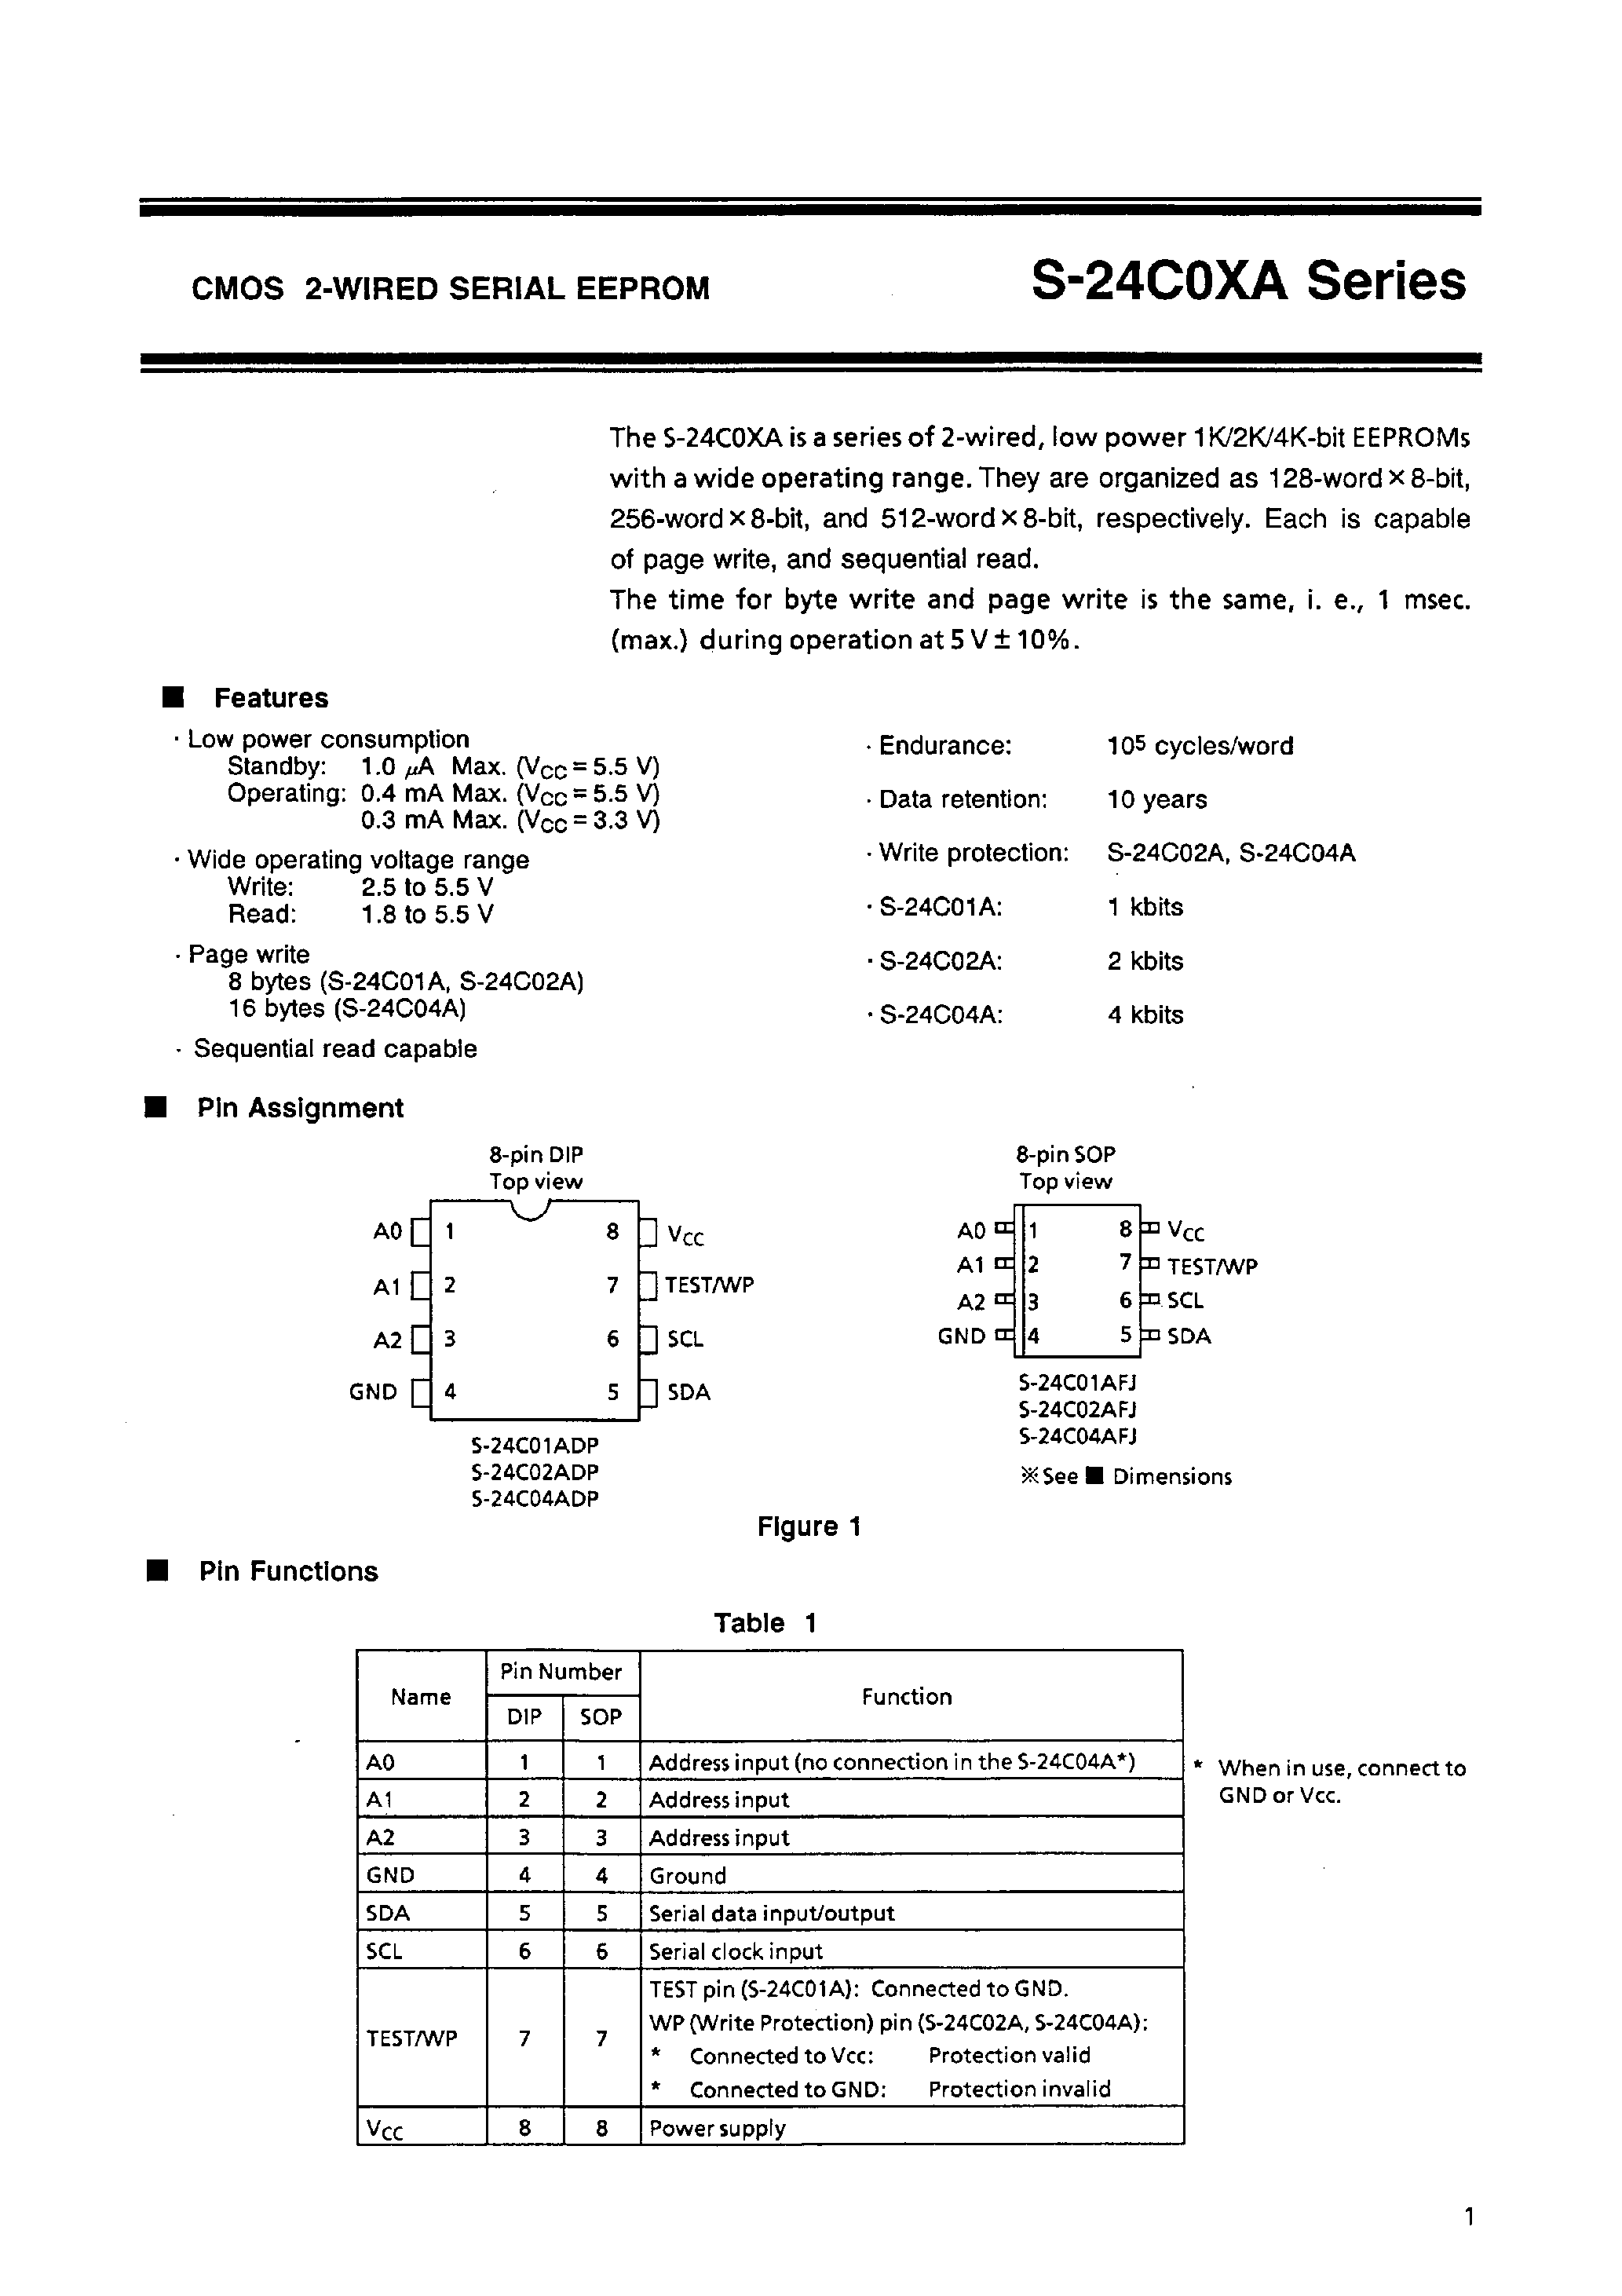 Datasheet S-24C02ADP-11-S - CMOS 2-WIRE SERIAL EEPROM page 2